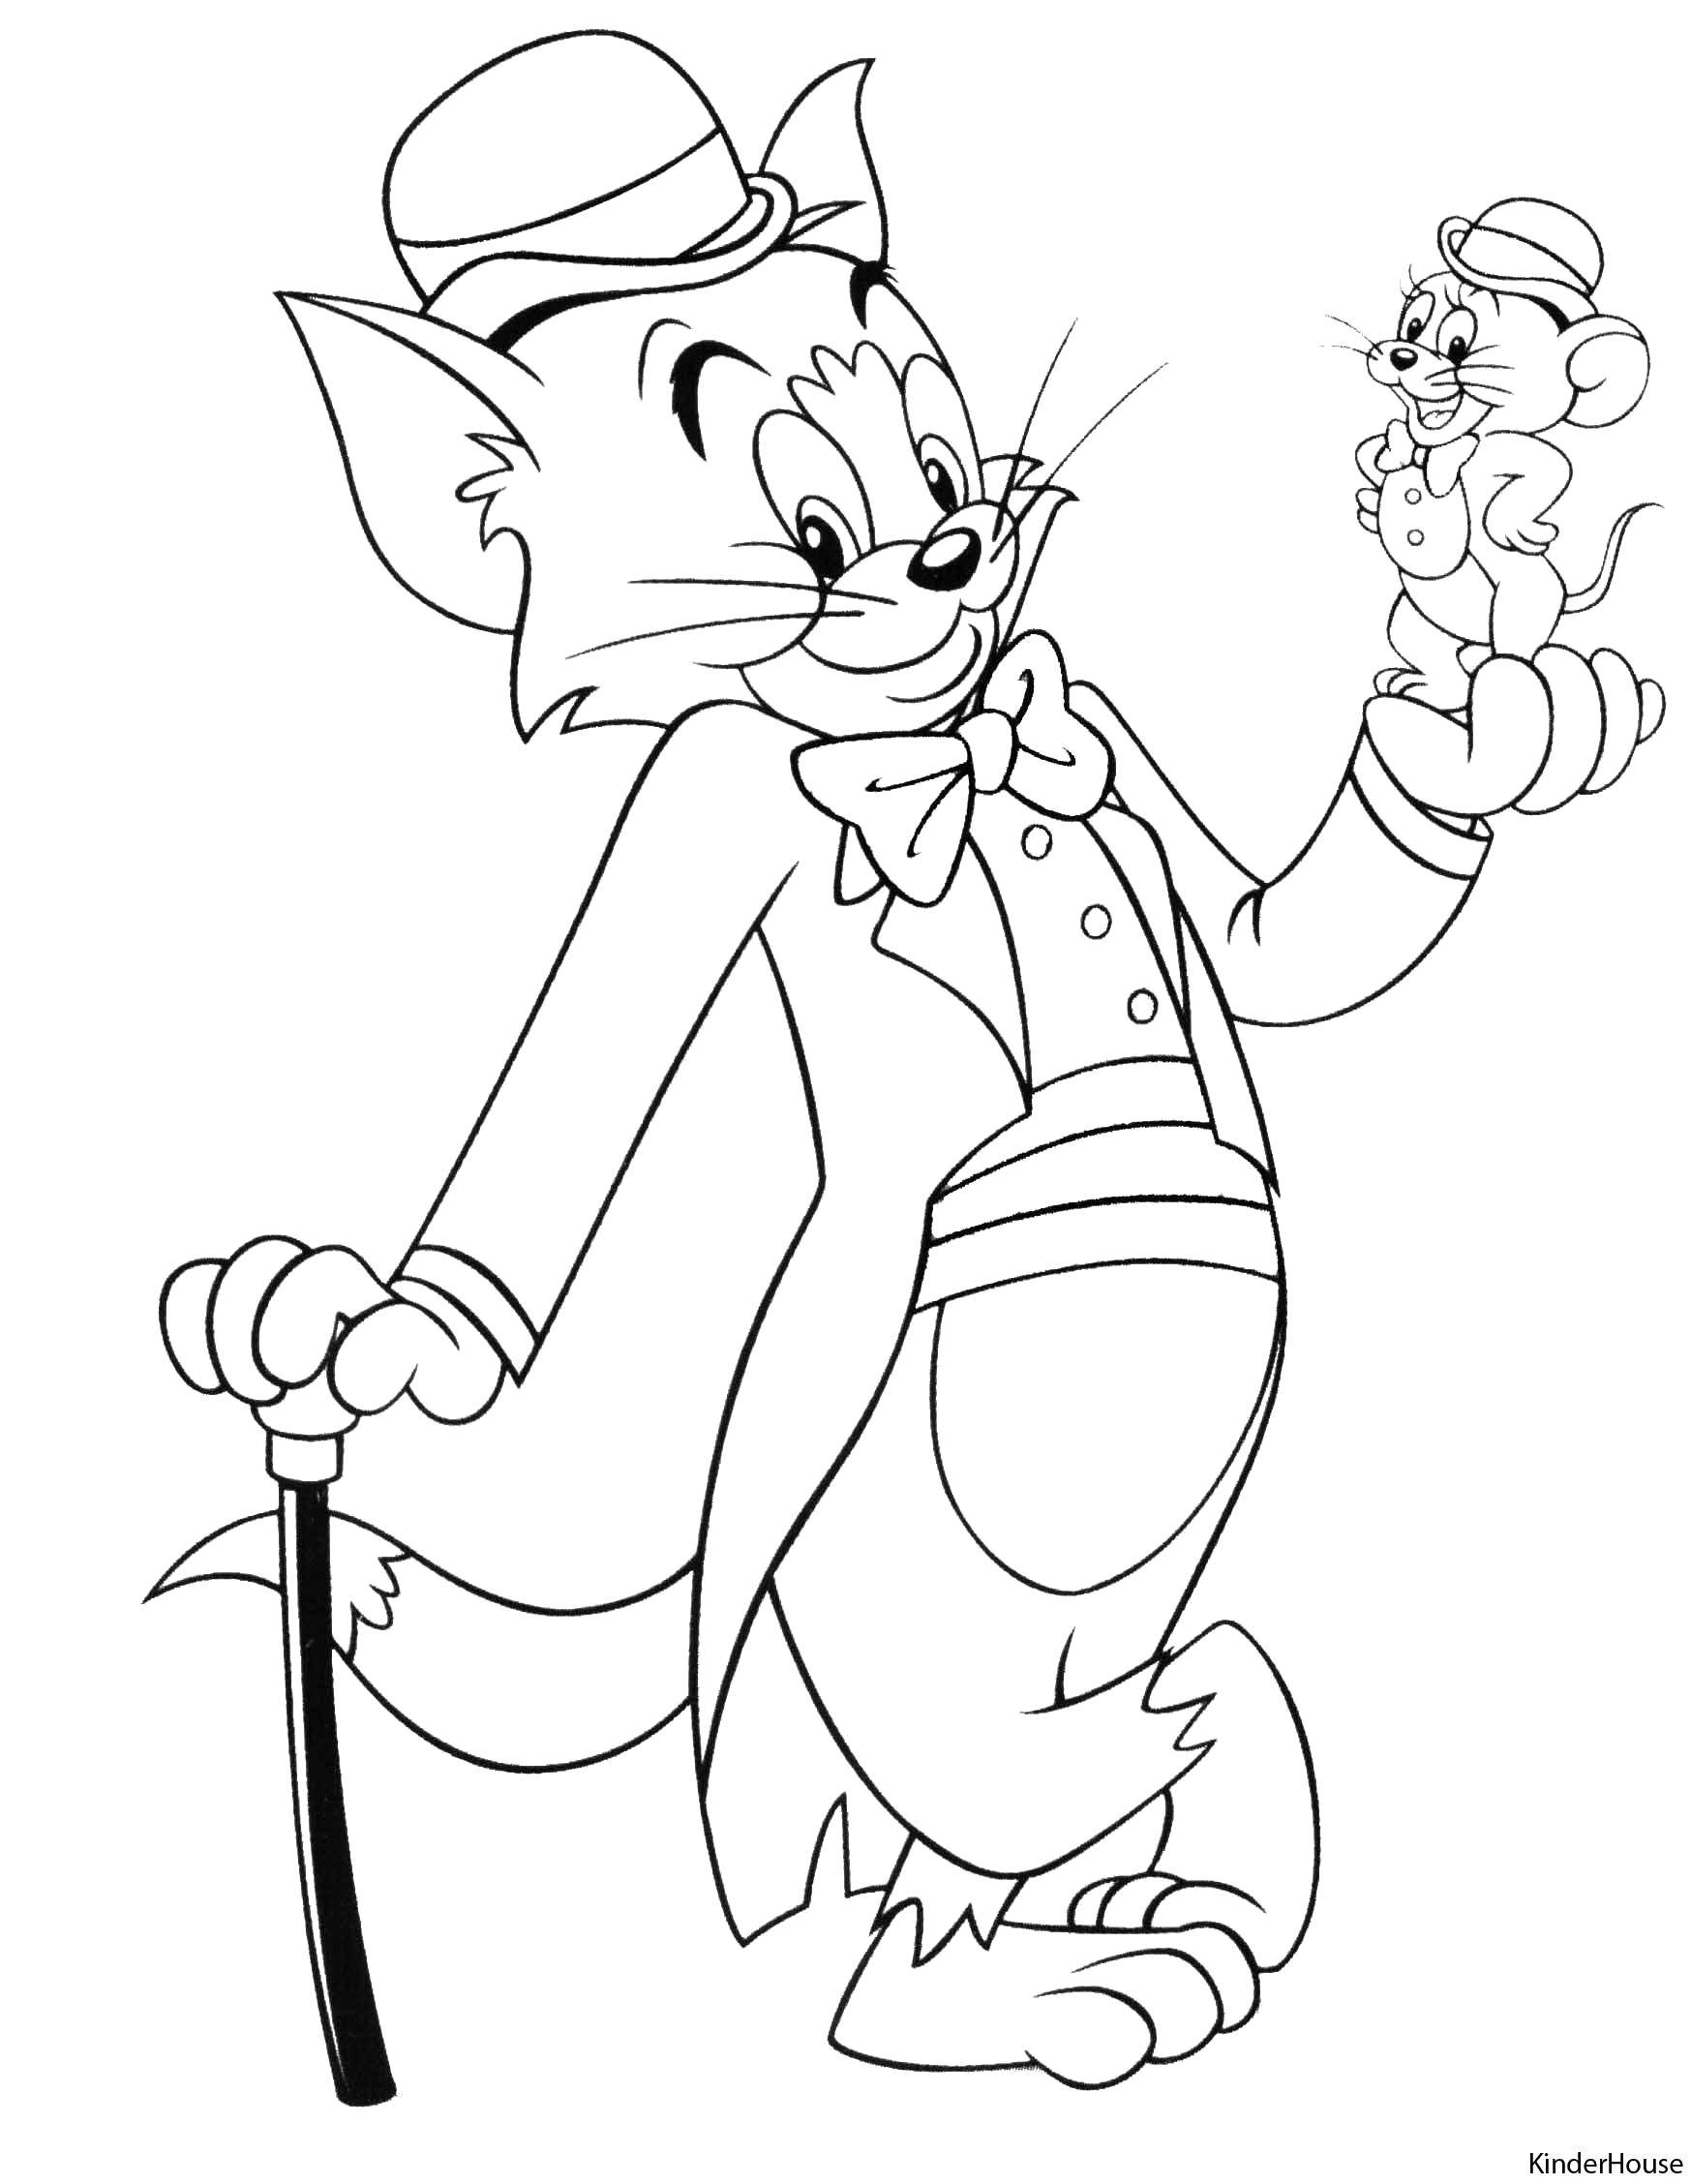 Coloring Tom and Jerry costumes. Category Tom and Jerry. Tags:  Character cartoon, Tom and Jerry.